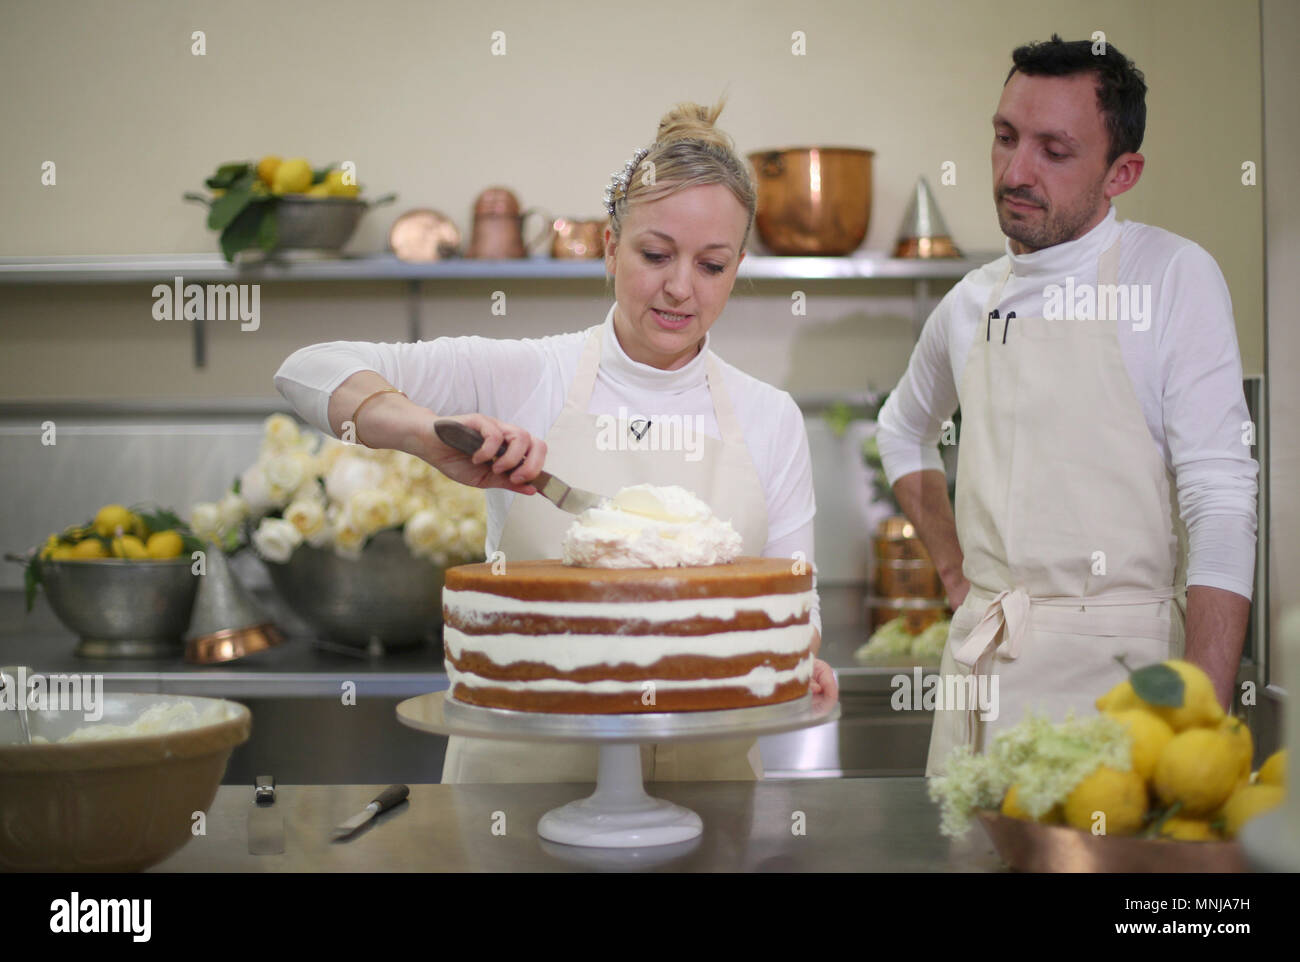 EMBARGOED TO 0001 FRIDAY MAY 18 Claire Ptak, owner of Violet Bakery in Hackney, east London, and head baker Izaak Adams put finishing touches to the cake for the wedding of Prince Harry and Meghan Markle in the kitchens at Buckingham Palace in London. Stock Photo